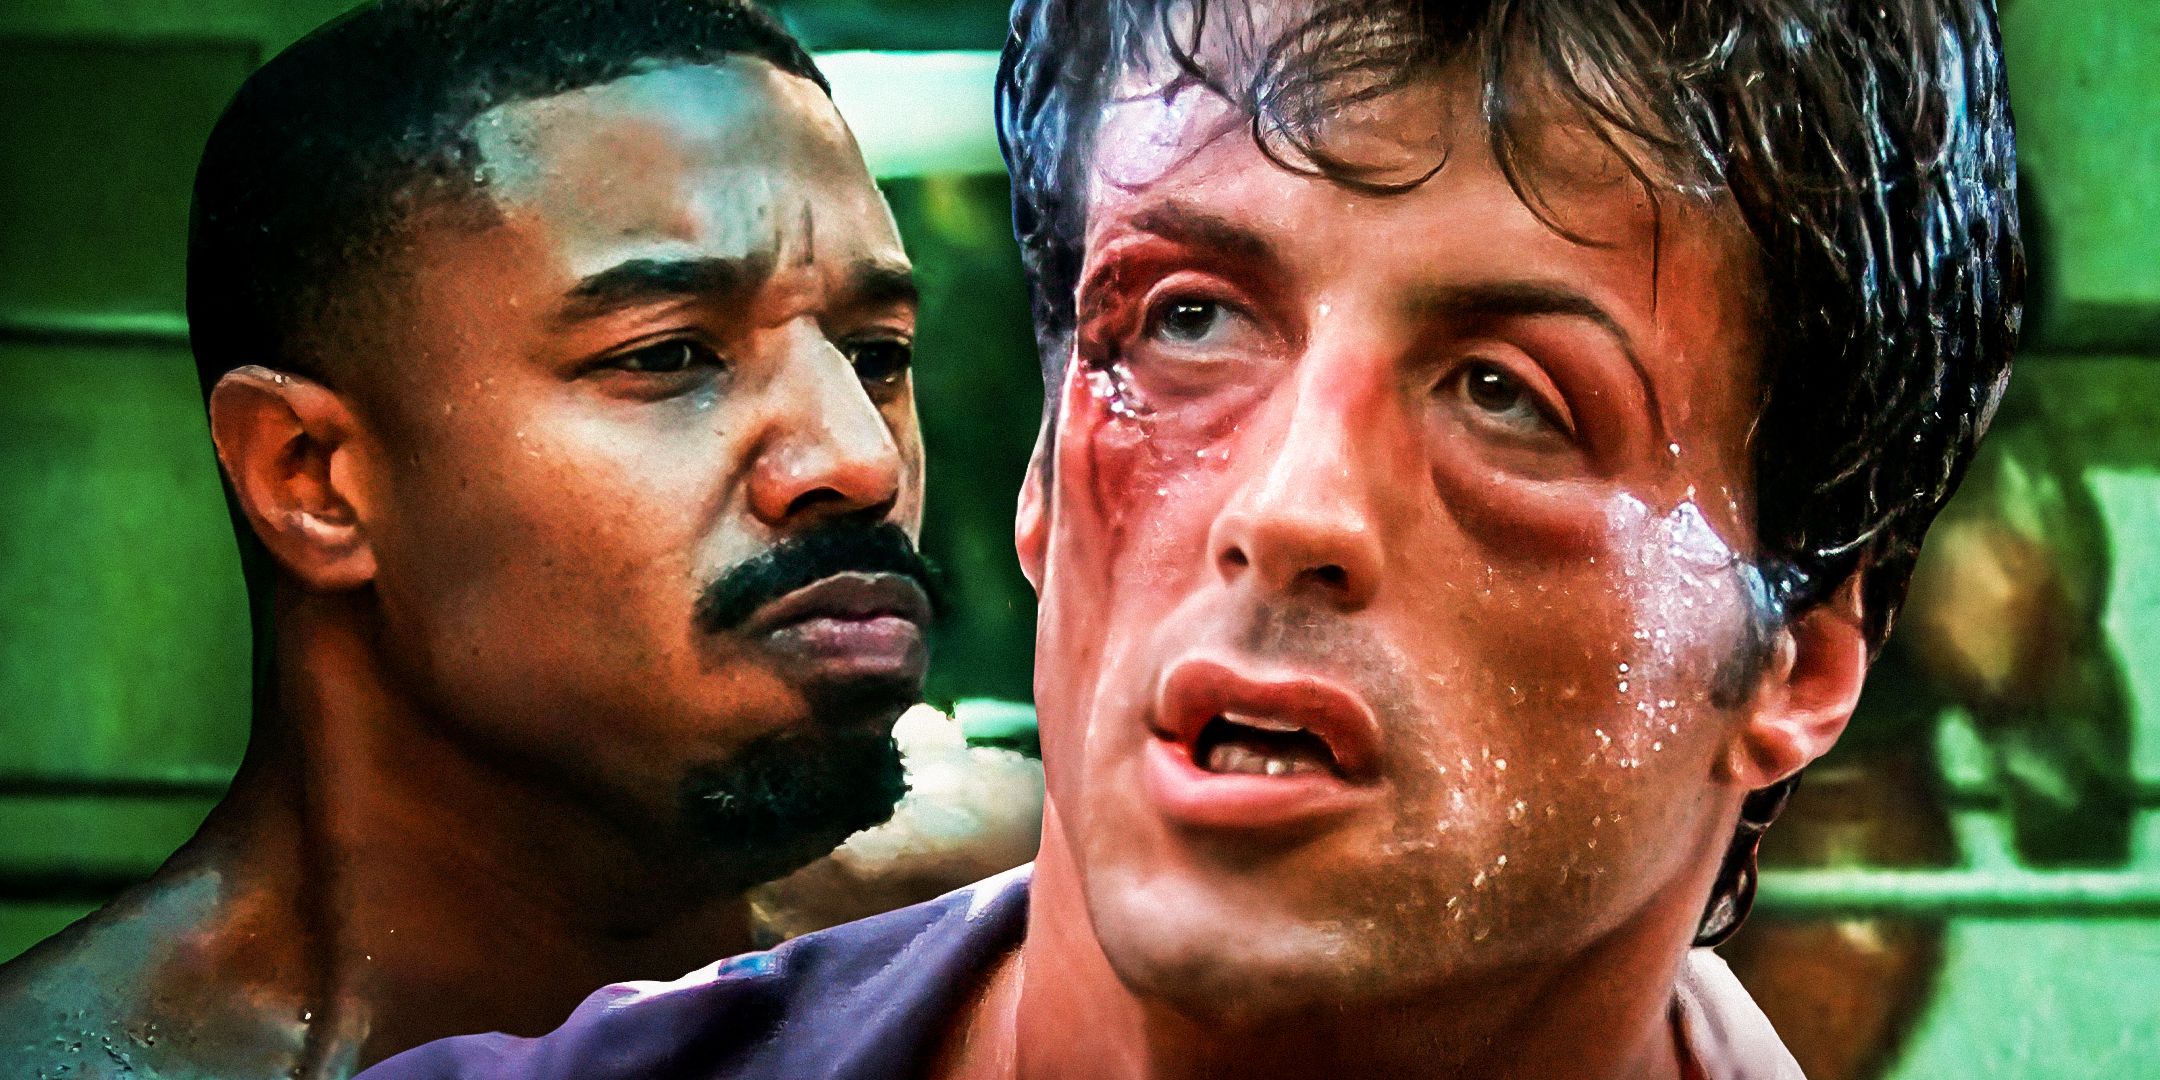 Michael B Jordan and Sylvester Stallone in Creed and Rocky IV